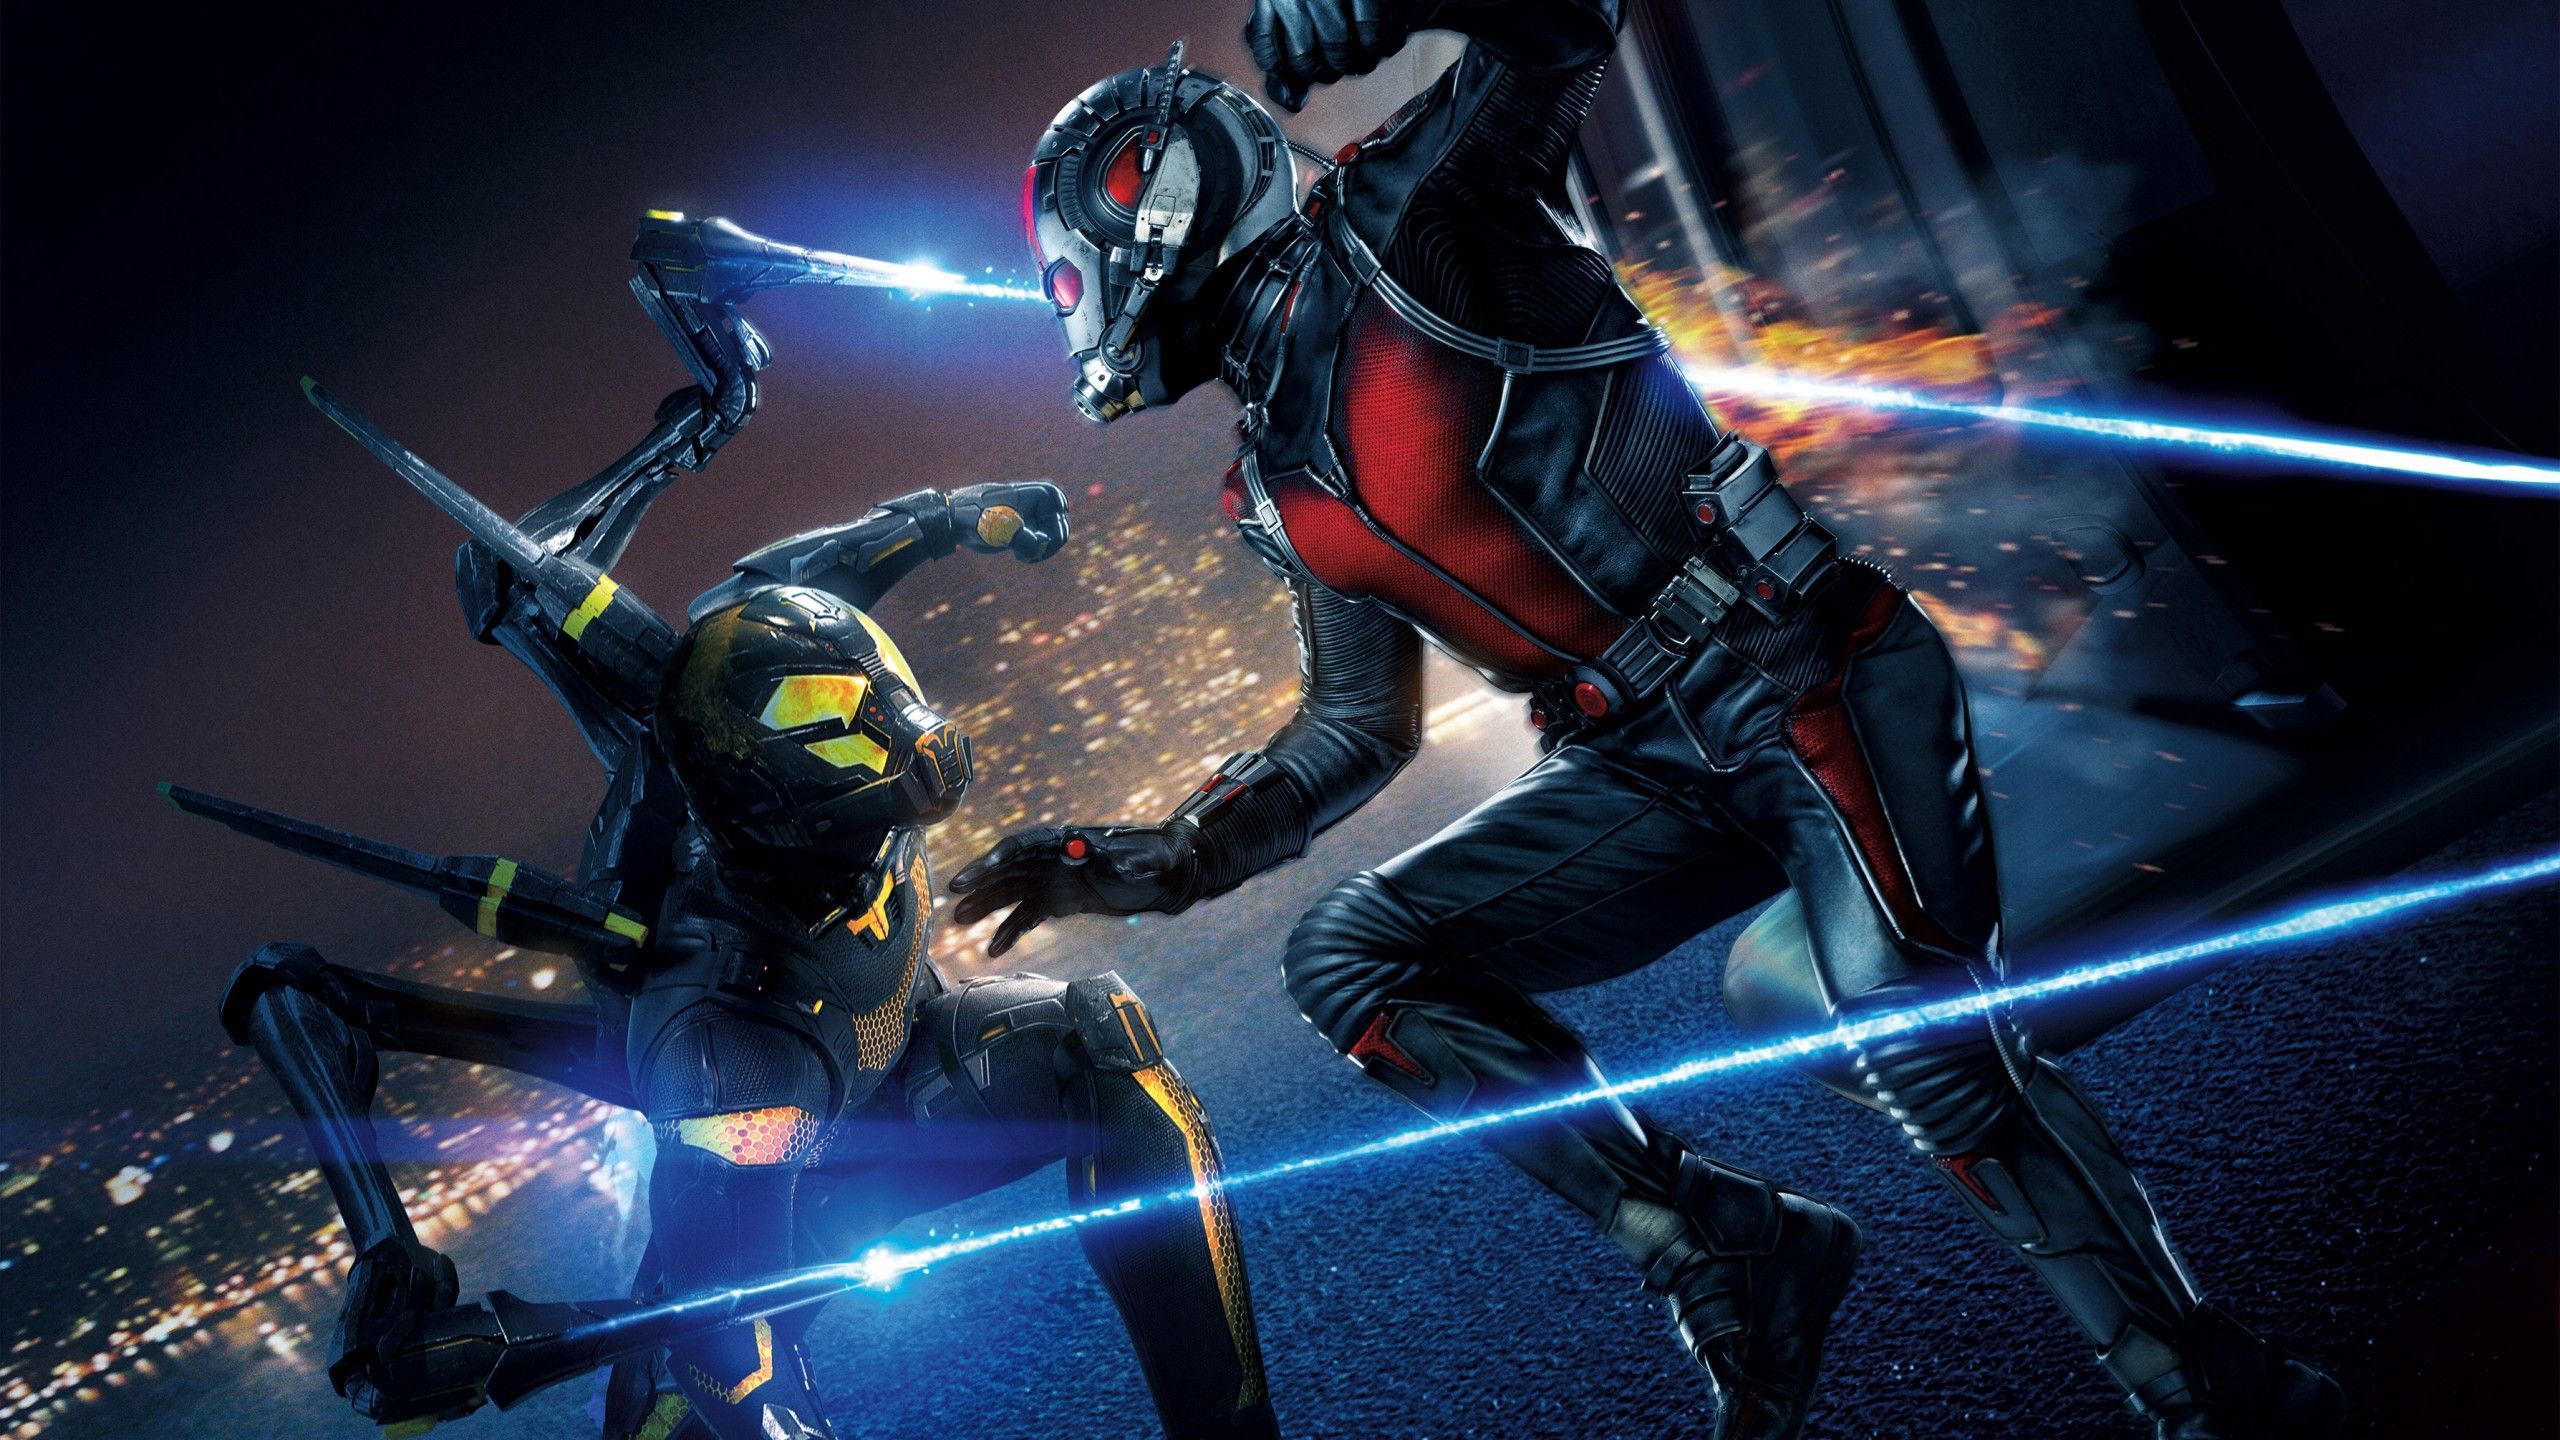 Ant Man and the Wasp Movie Computer Wallpaper 65442 2560x1440px